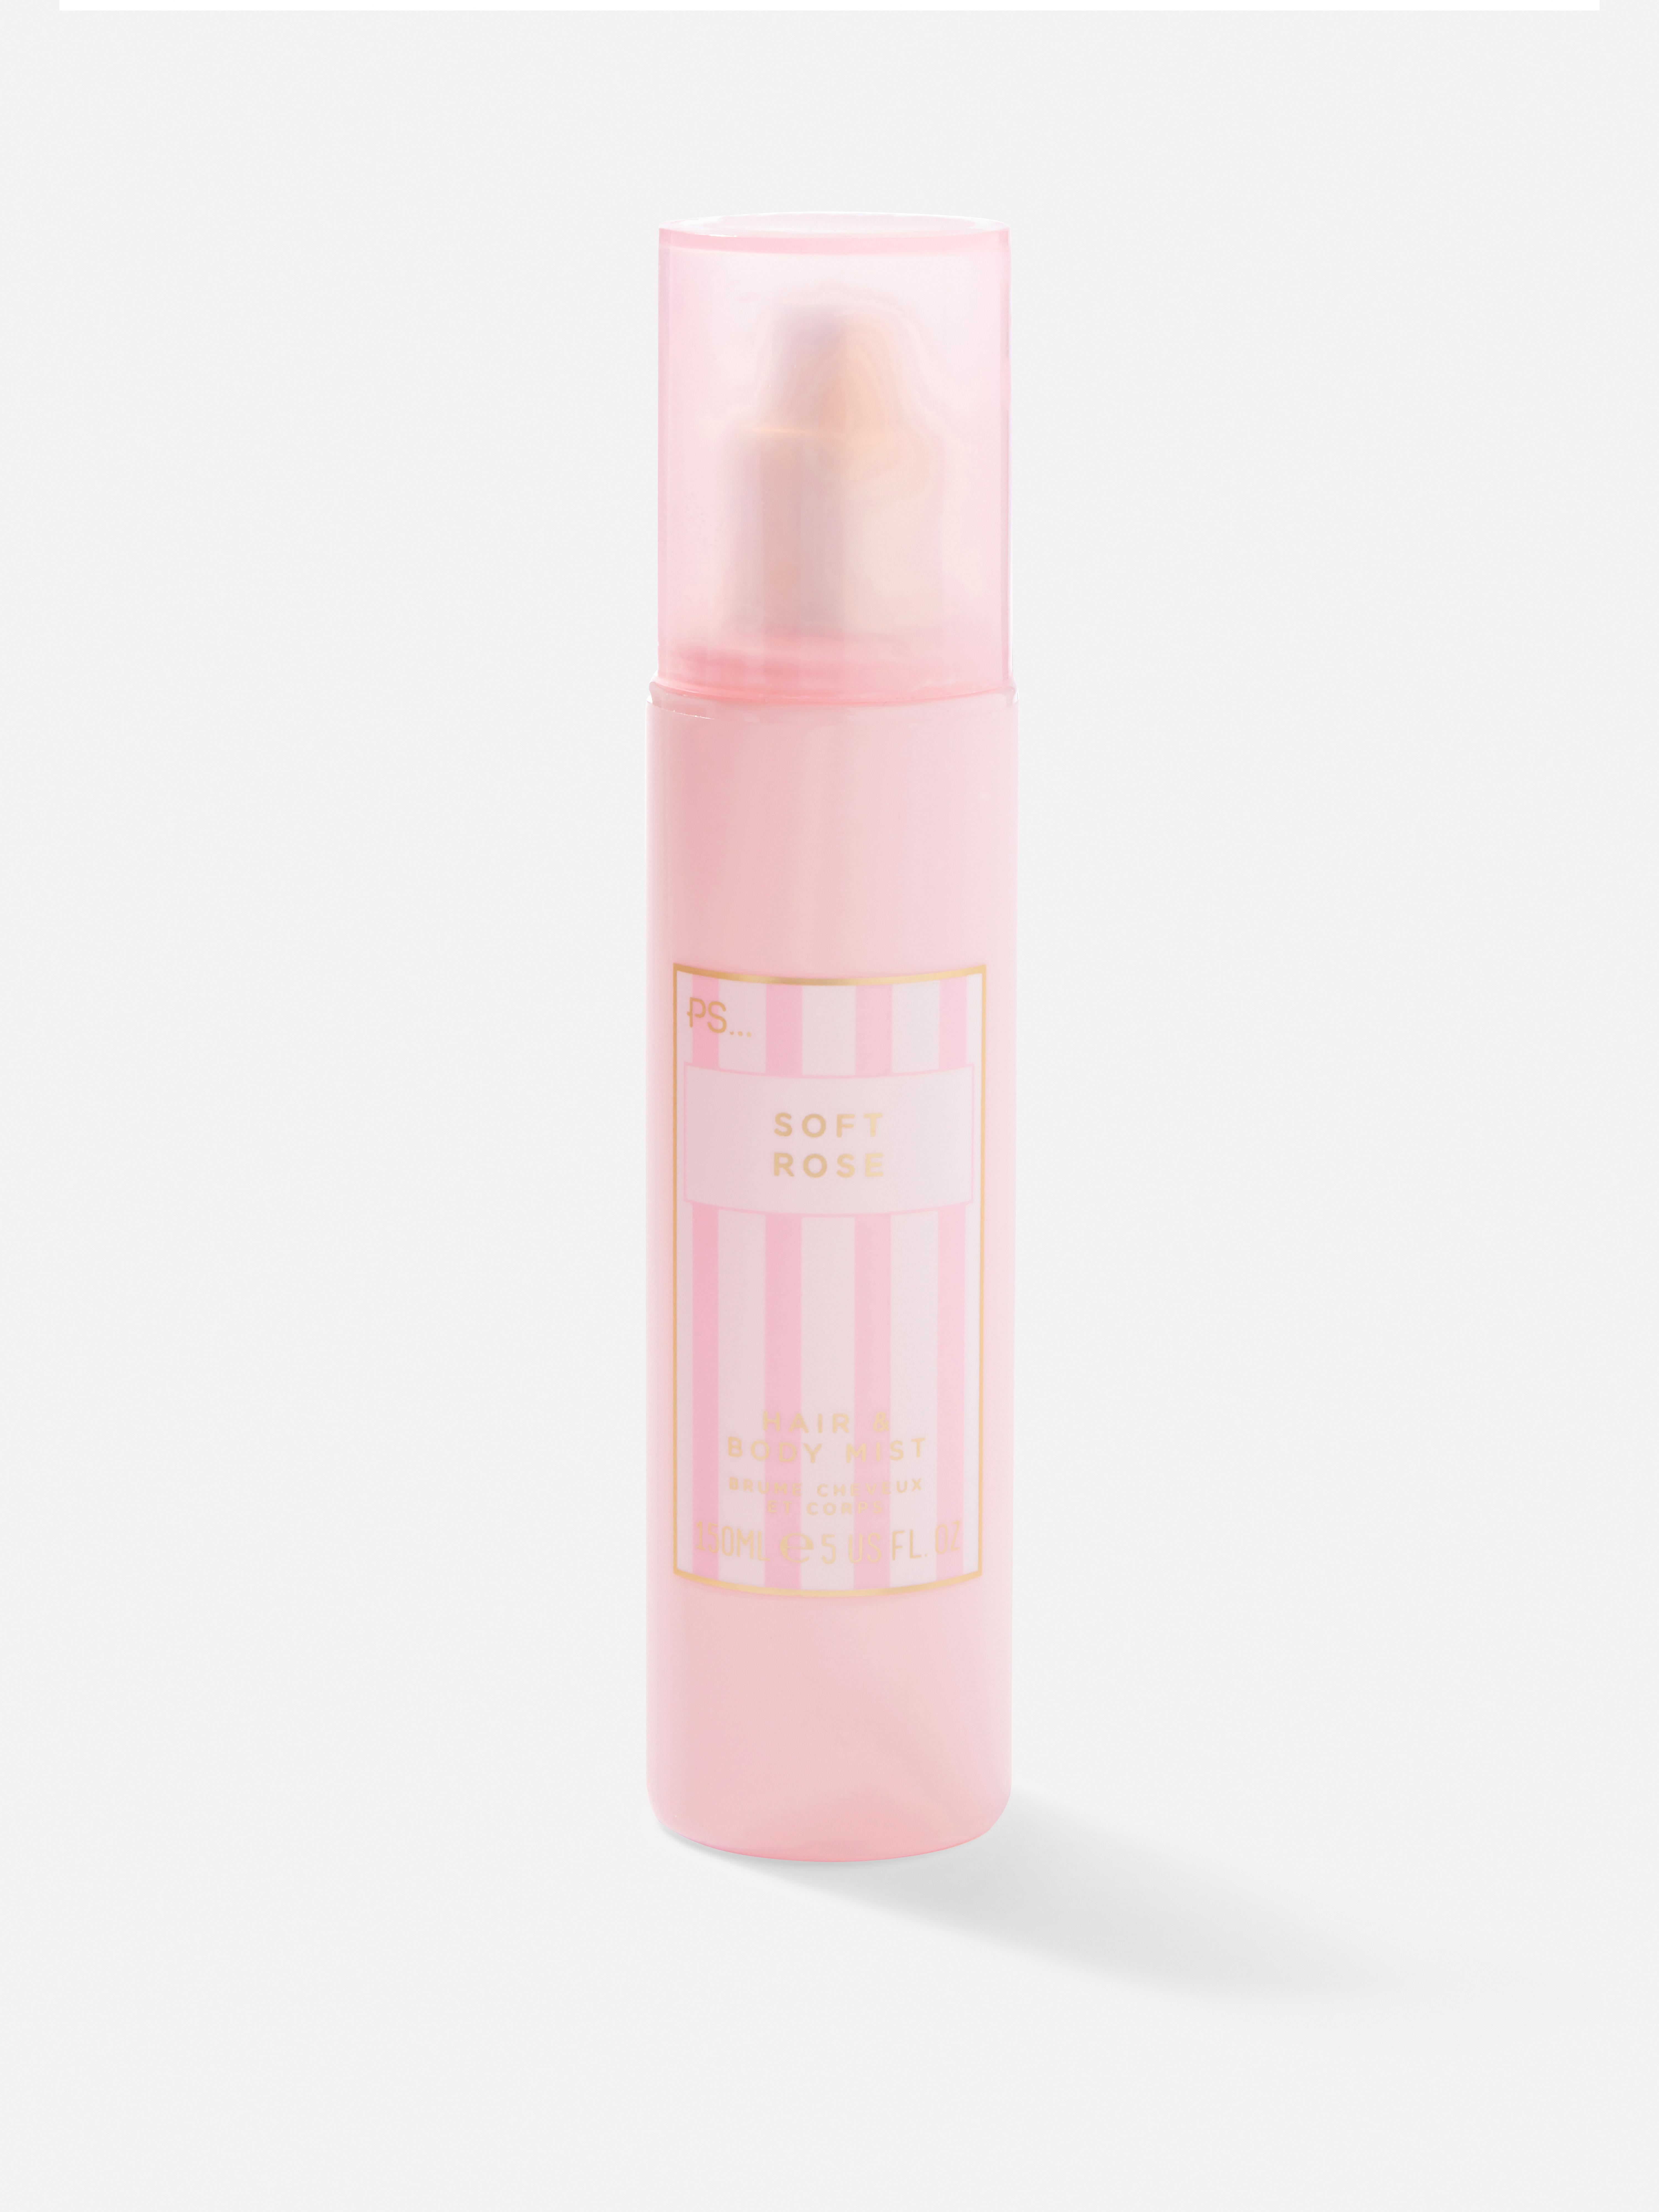 PS... Floral Body Mist